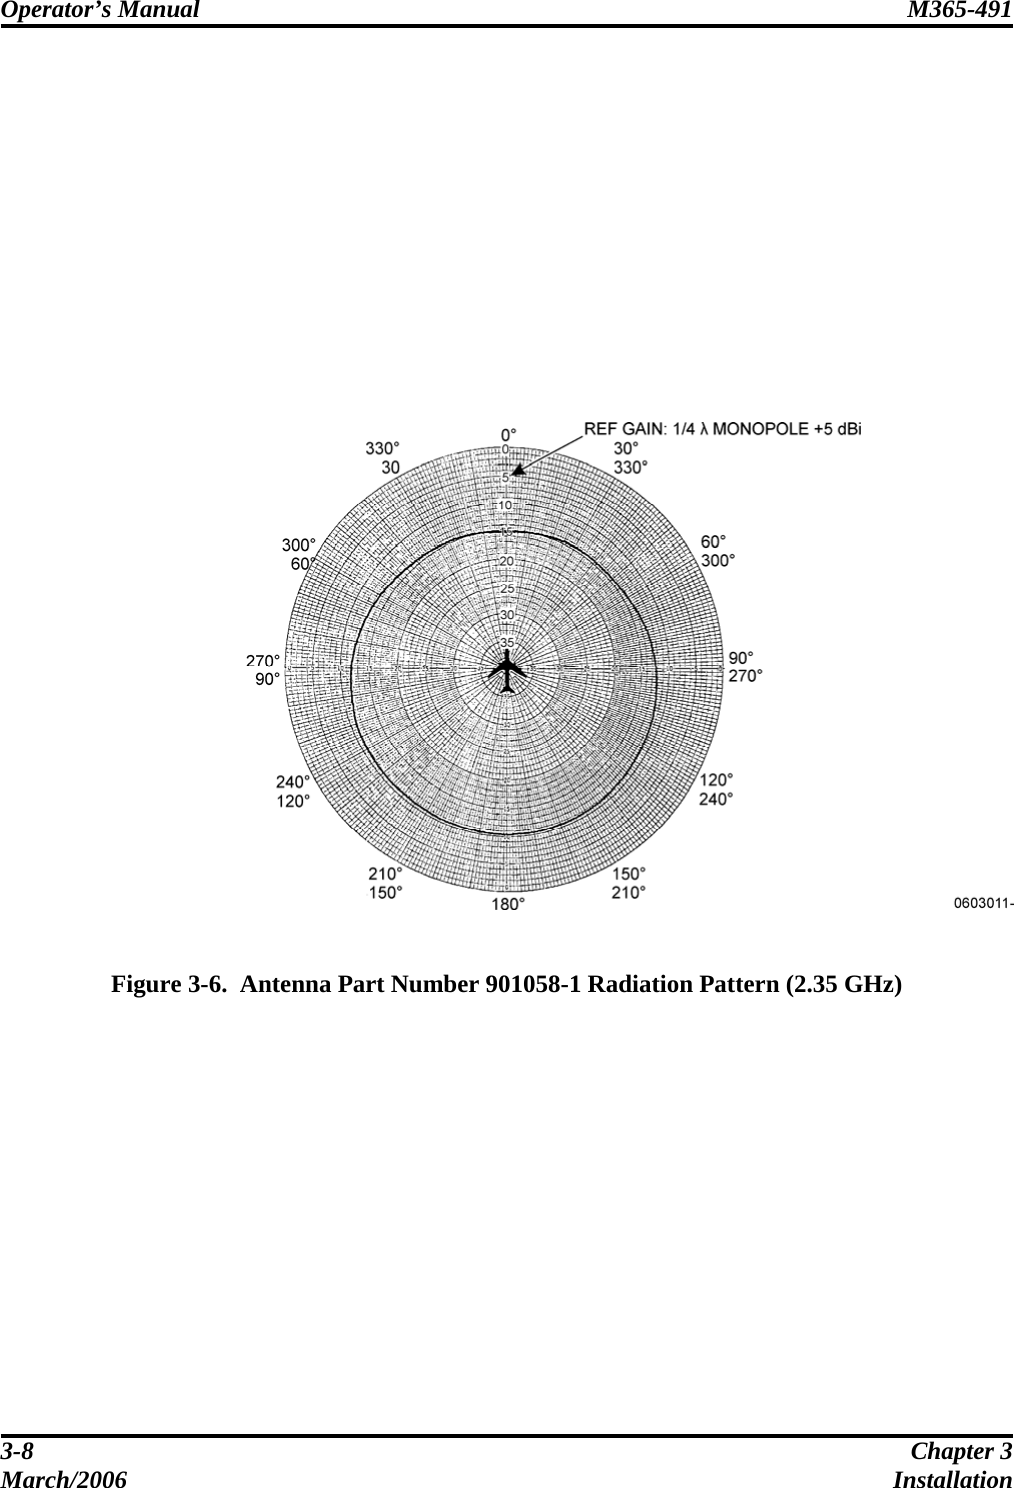 Operator’s Manual  M365-491   3-8  Chapter 3 March/2006 Installation                Figure 3-6.  Antenna Part Number 901058-1 Radiation Pattern (2.35 GHz) 